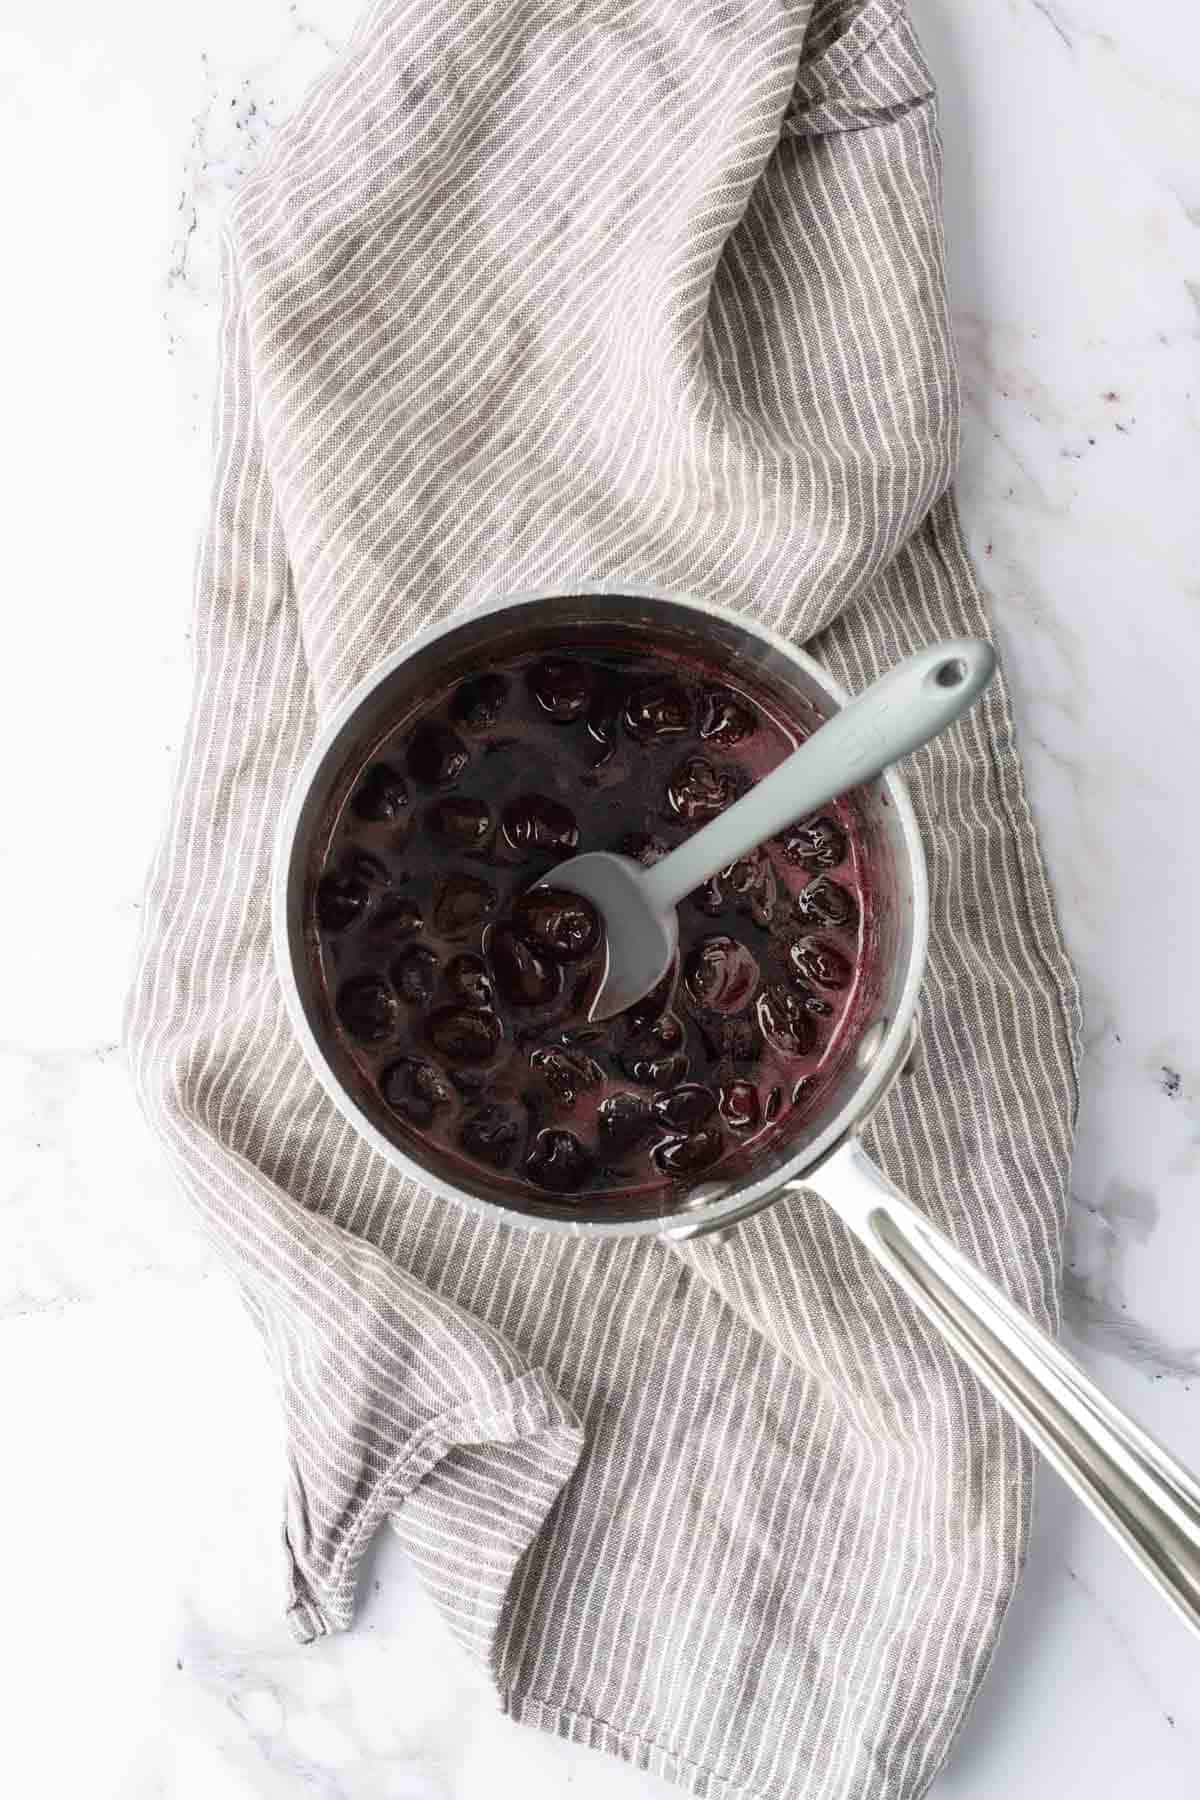 A saucepan filled with dark cherries in liquid, placed on a gray and white striped cloth. A silver spoon is in the saucepan.